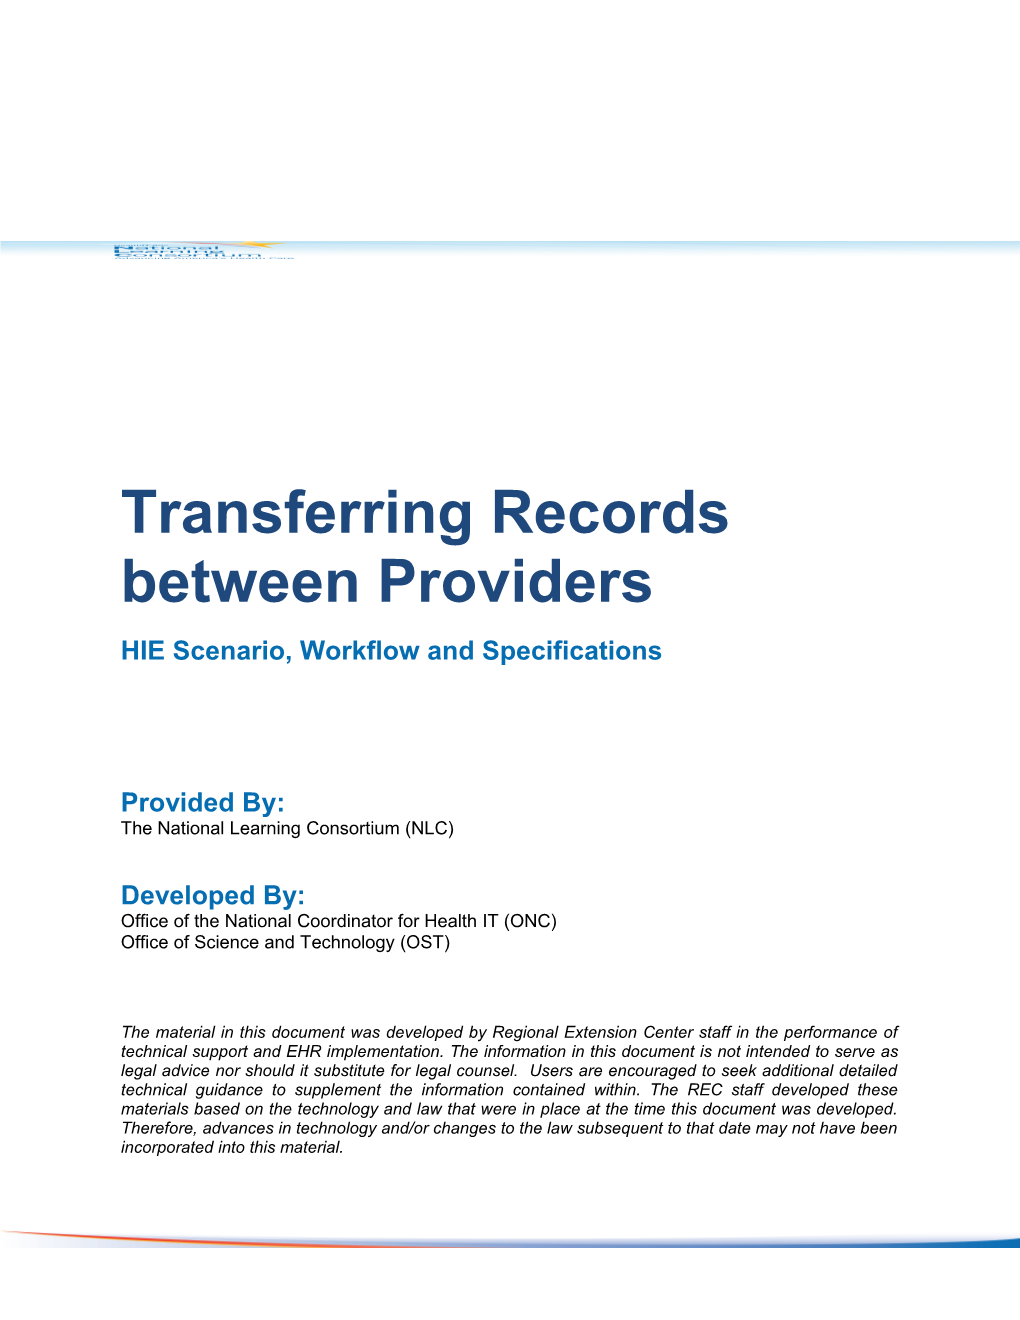 Transferring Records Between Providers